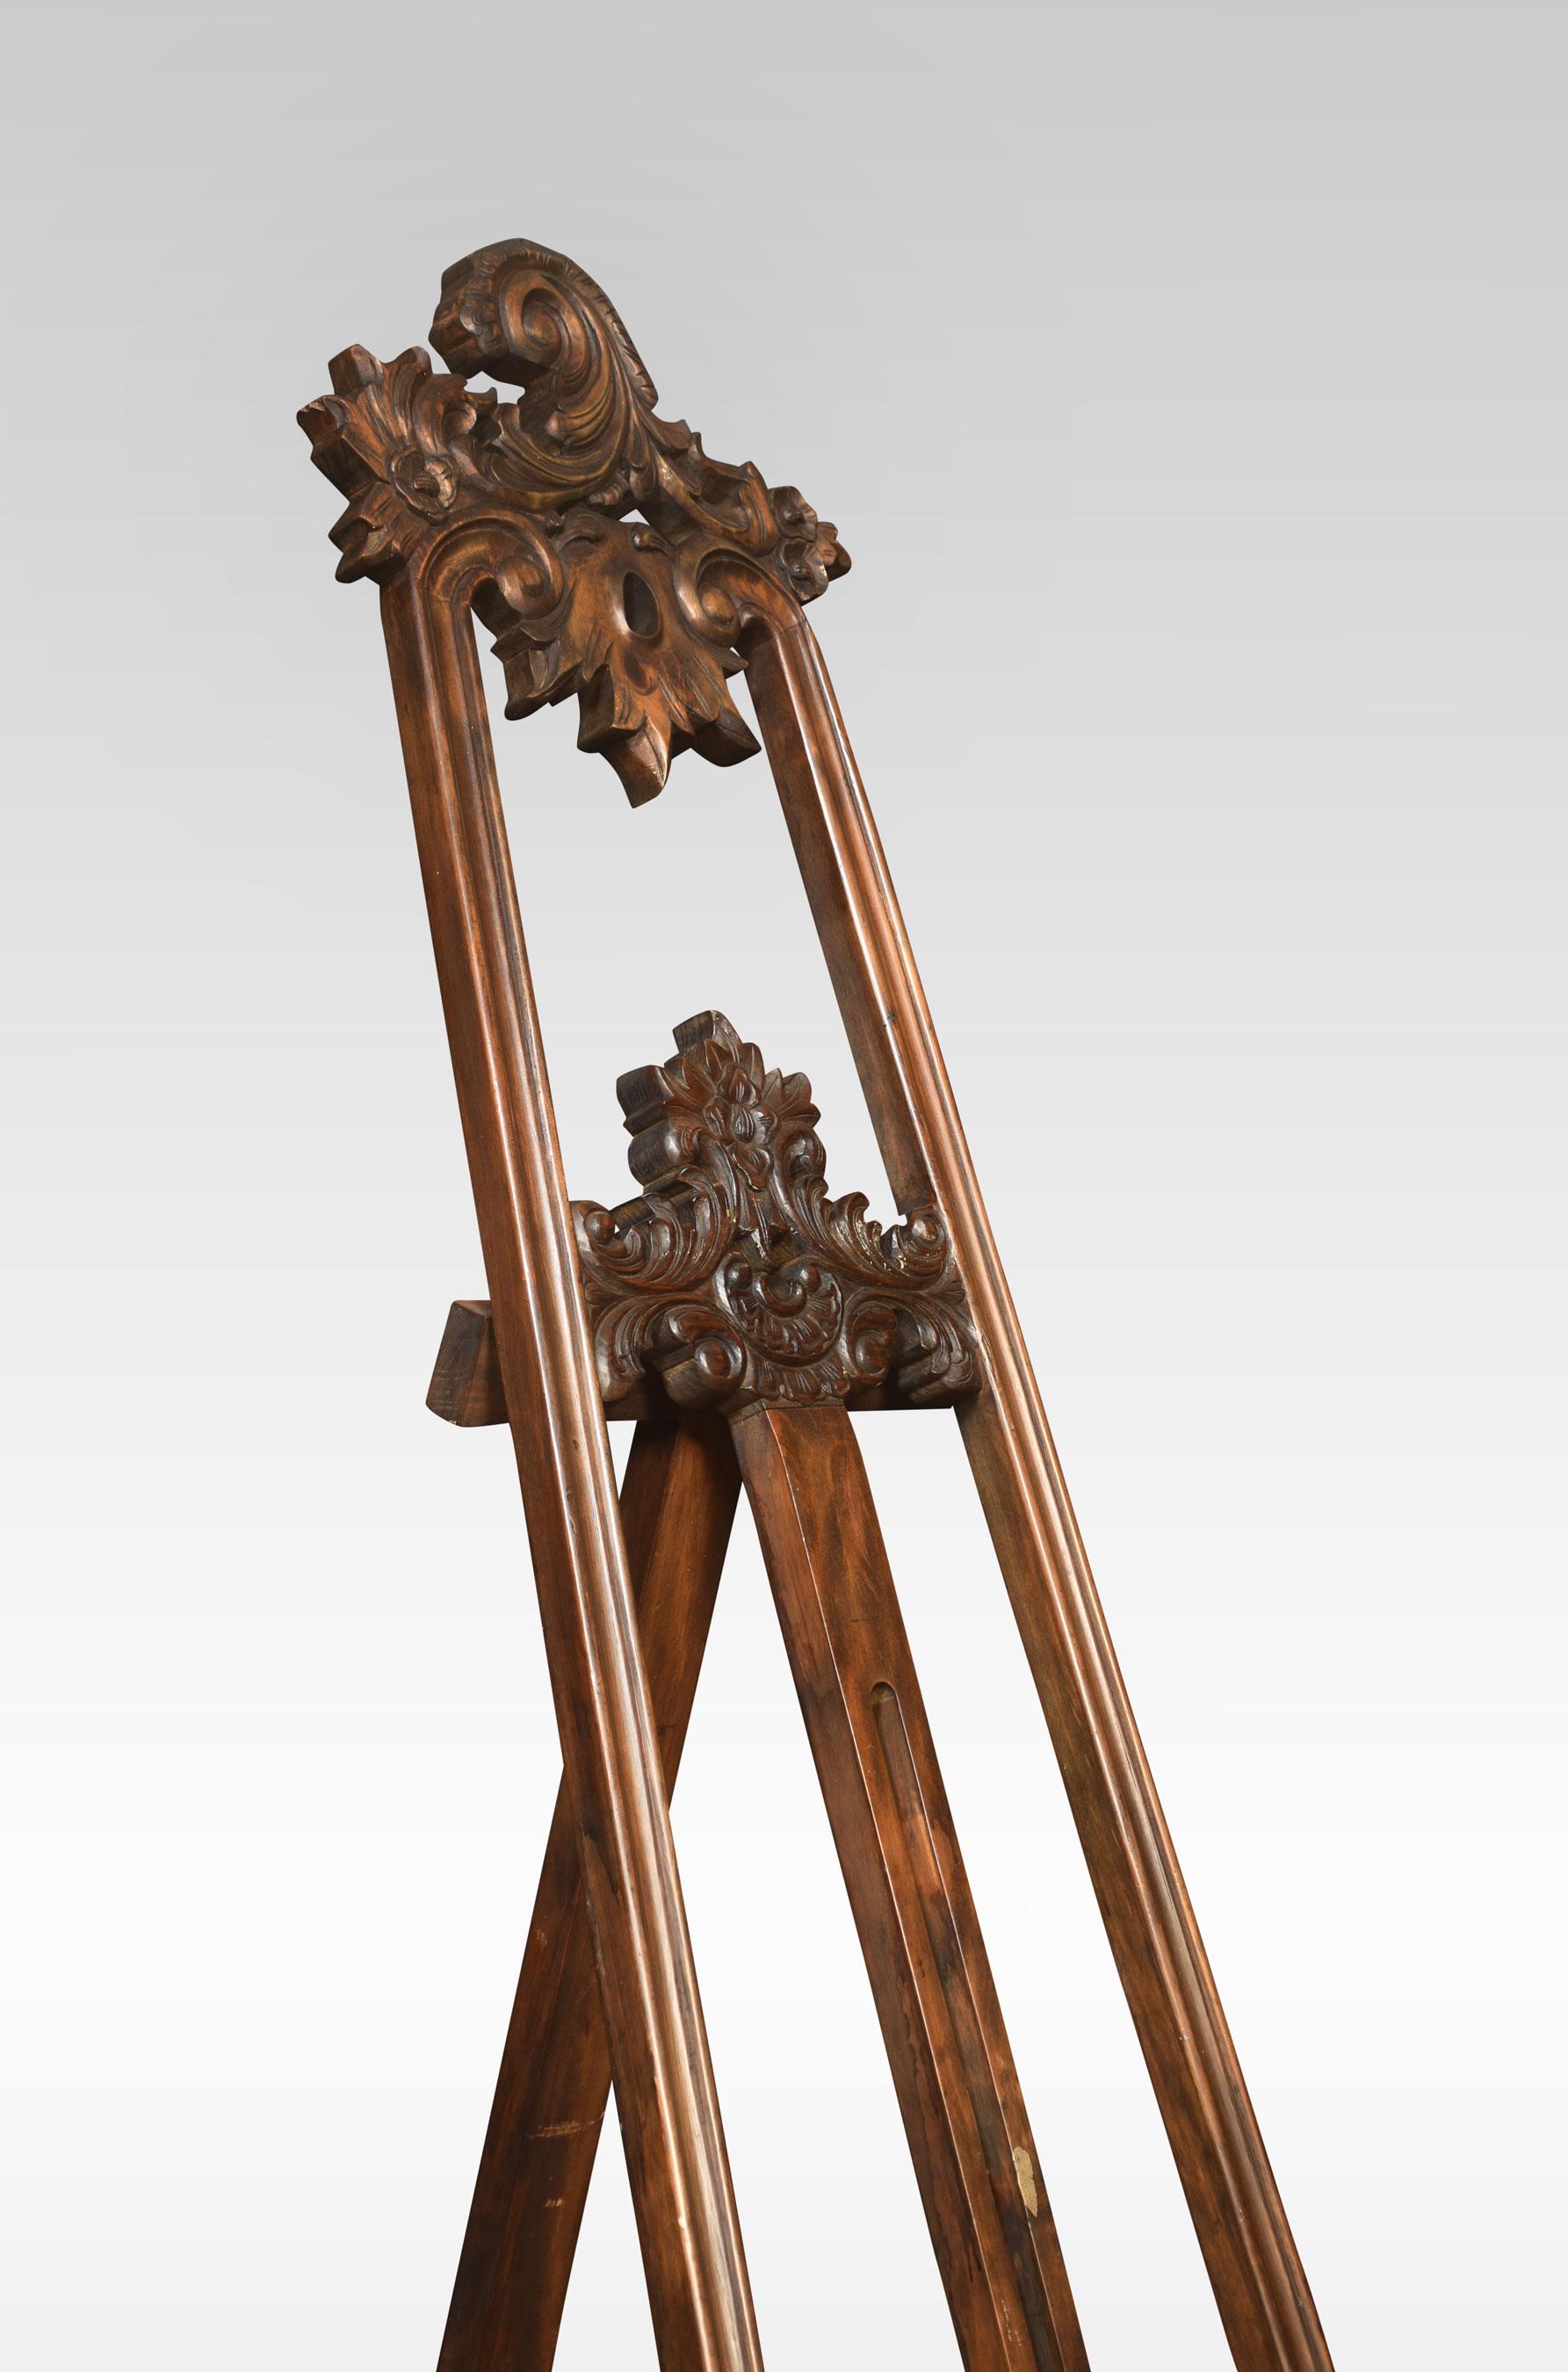 Carved walnut picture easel, the frame having large carved cartouch to the solid walnut frame having adjustable scrolling rest.
Dimensions
Height 81 Inches
Width 32 Inches
Depth 37 Inches